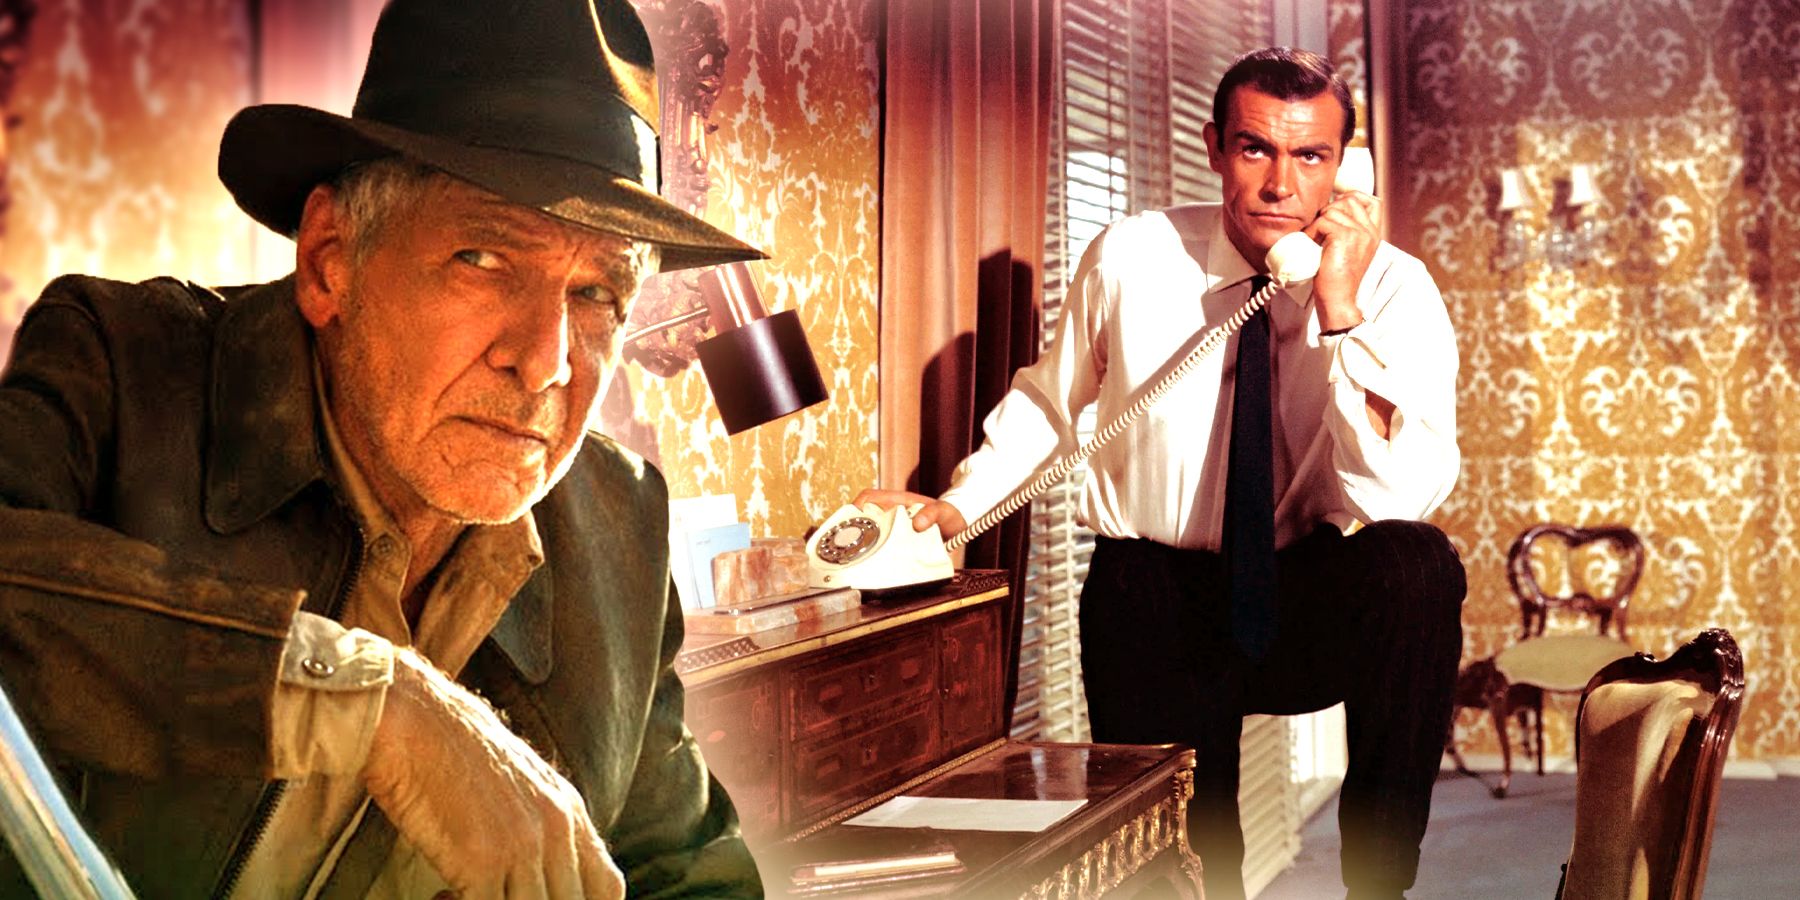 Indiana Jones 5's Setting Connects to the Franchise's James Bond Inspiration